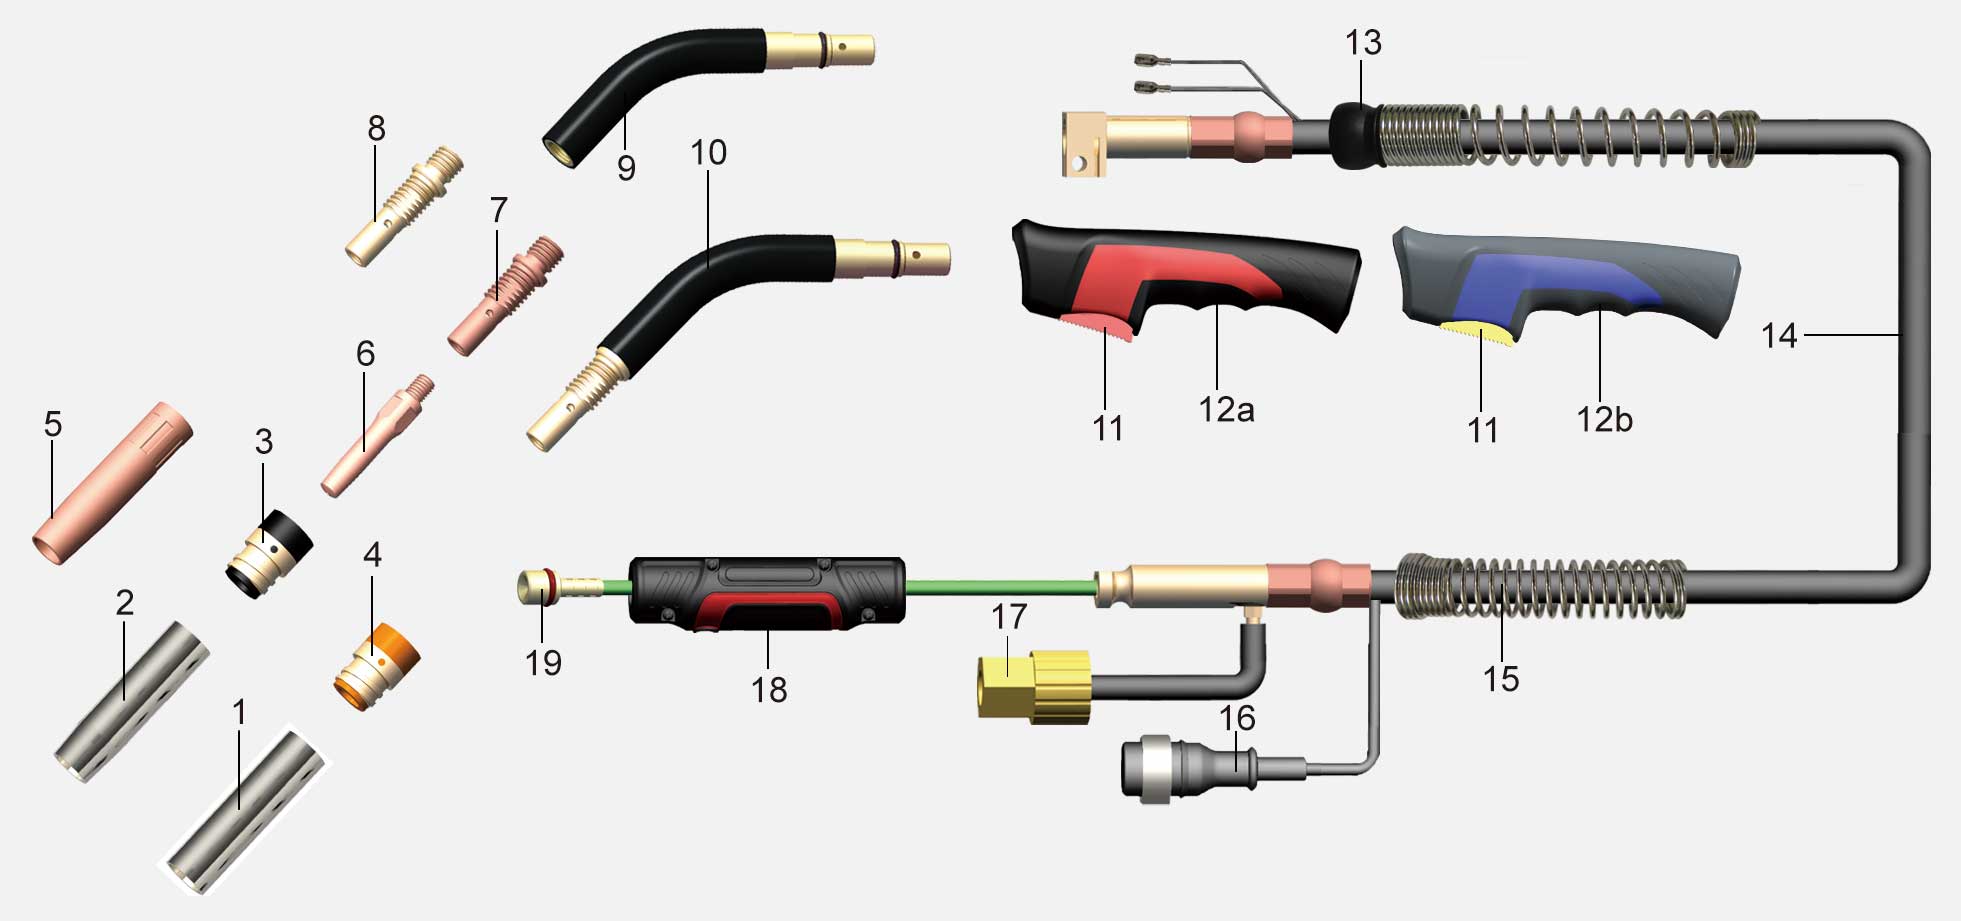 Product structure of the 200A Air cooled MIG/MAG welding torch